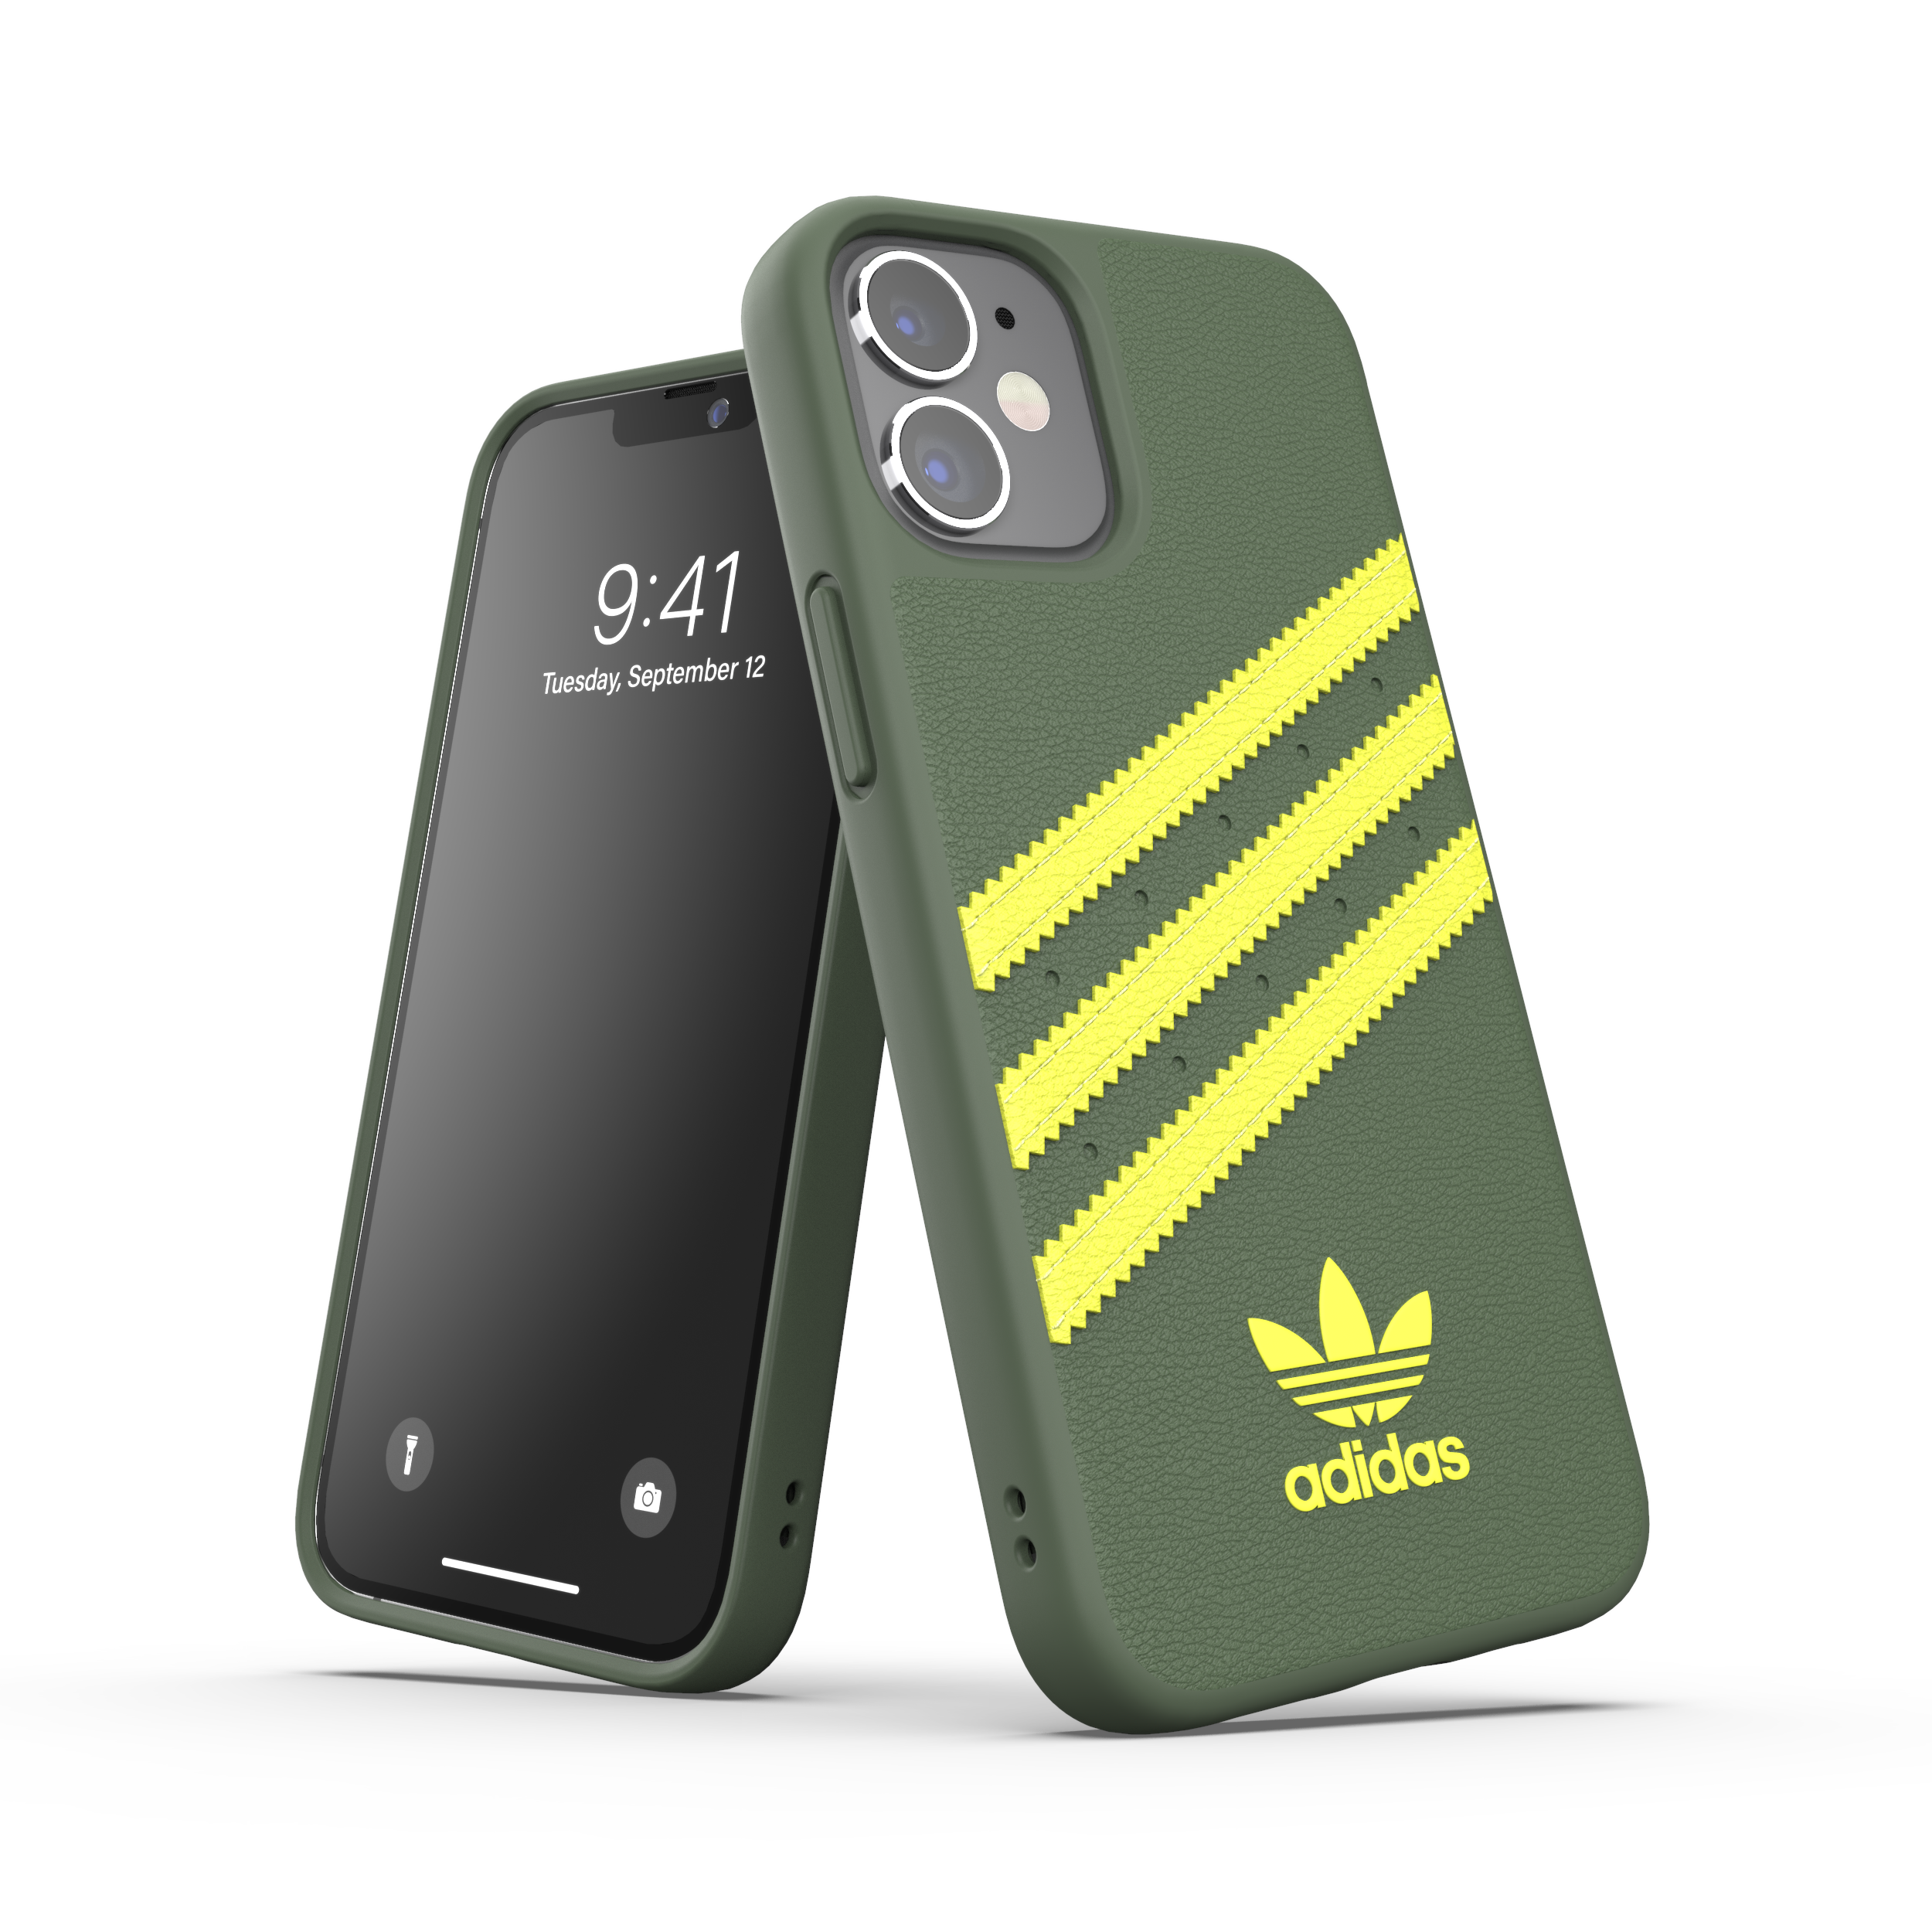 ADIDAS Moulded Case PU, MINI, IPHONE APPLE, Backcover, GREEN 12